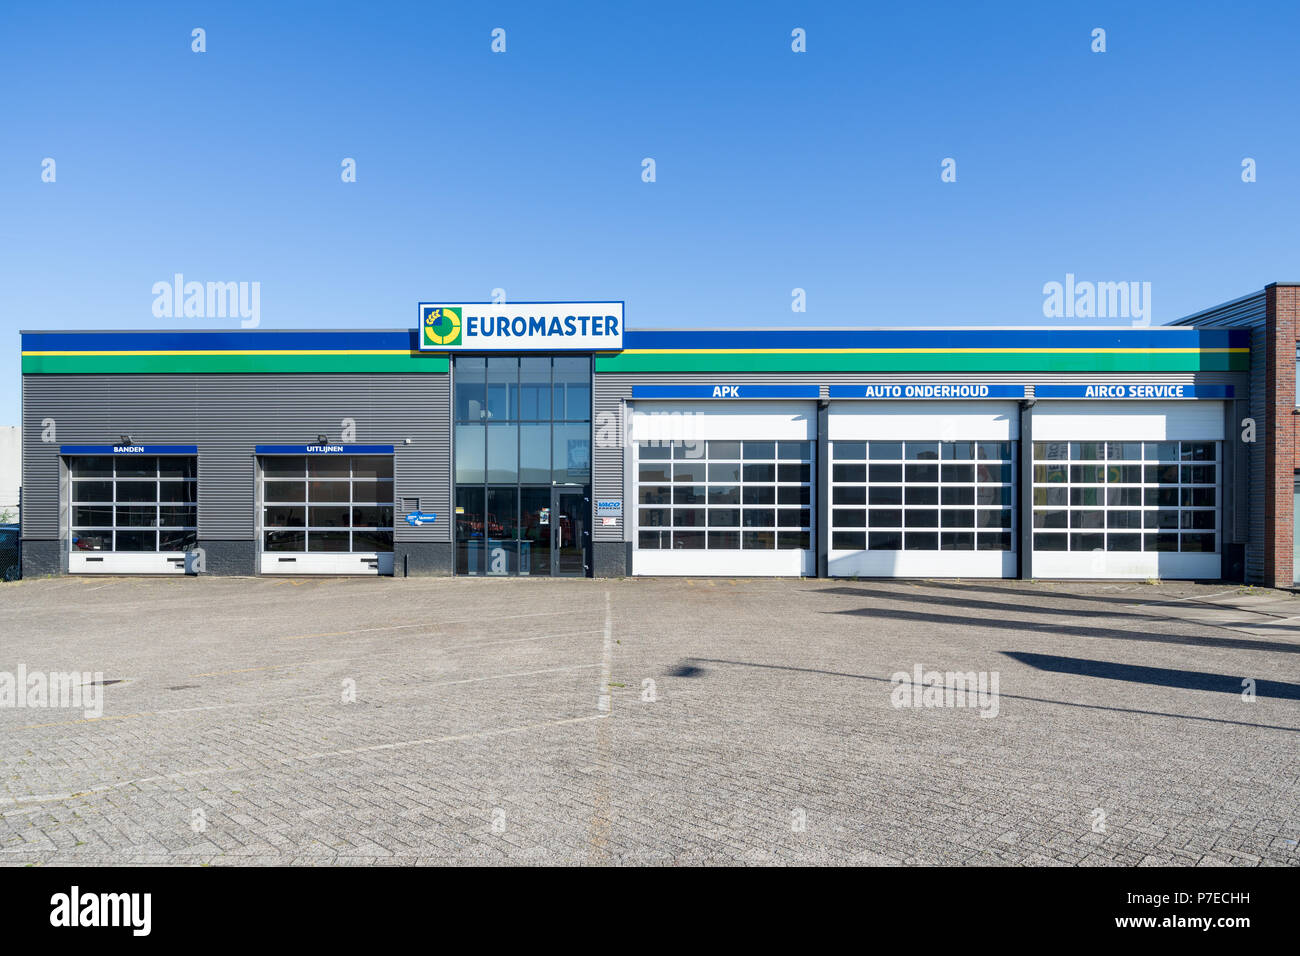 Euromaster garage. Euromaster offers tire services and vehicle maintenance across Europe and is a subsidiary of the tire maker Michelin. Stock Photo